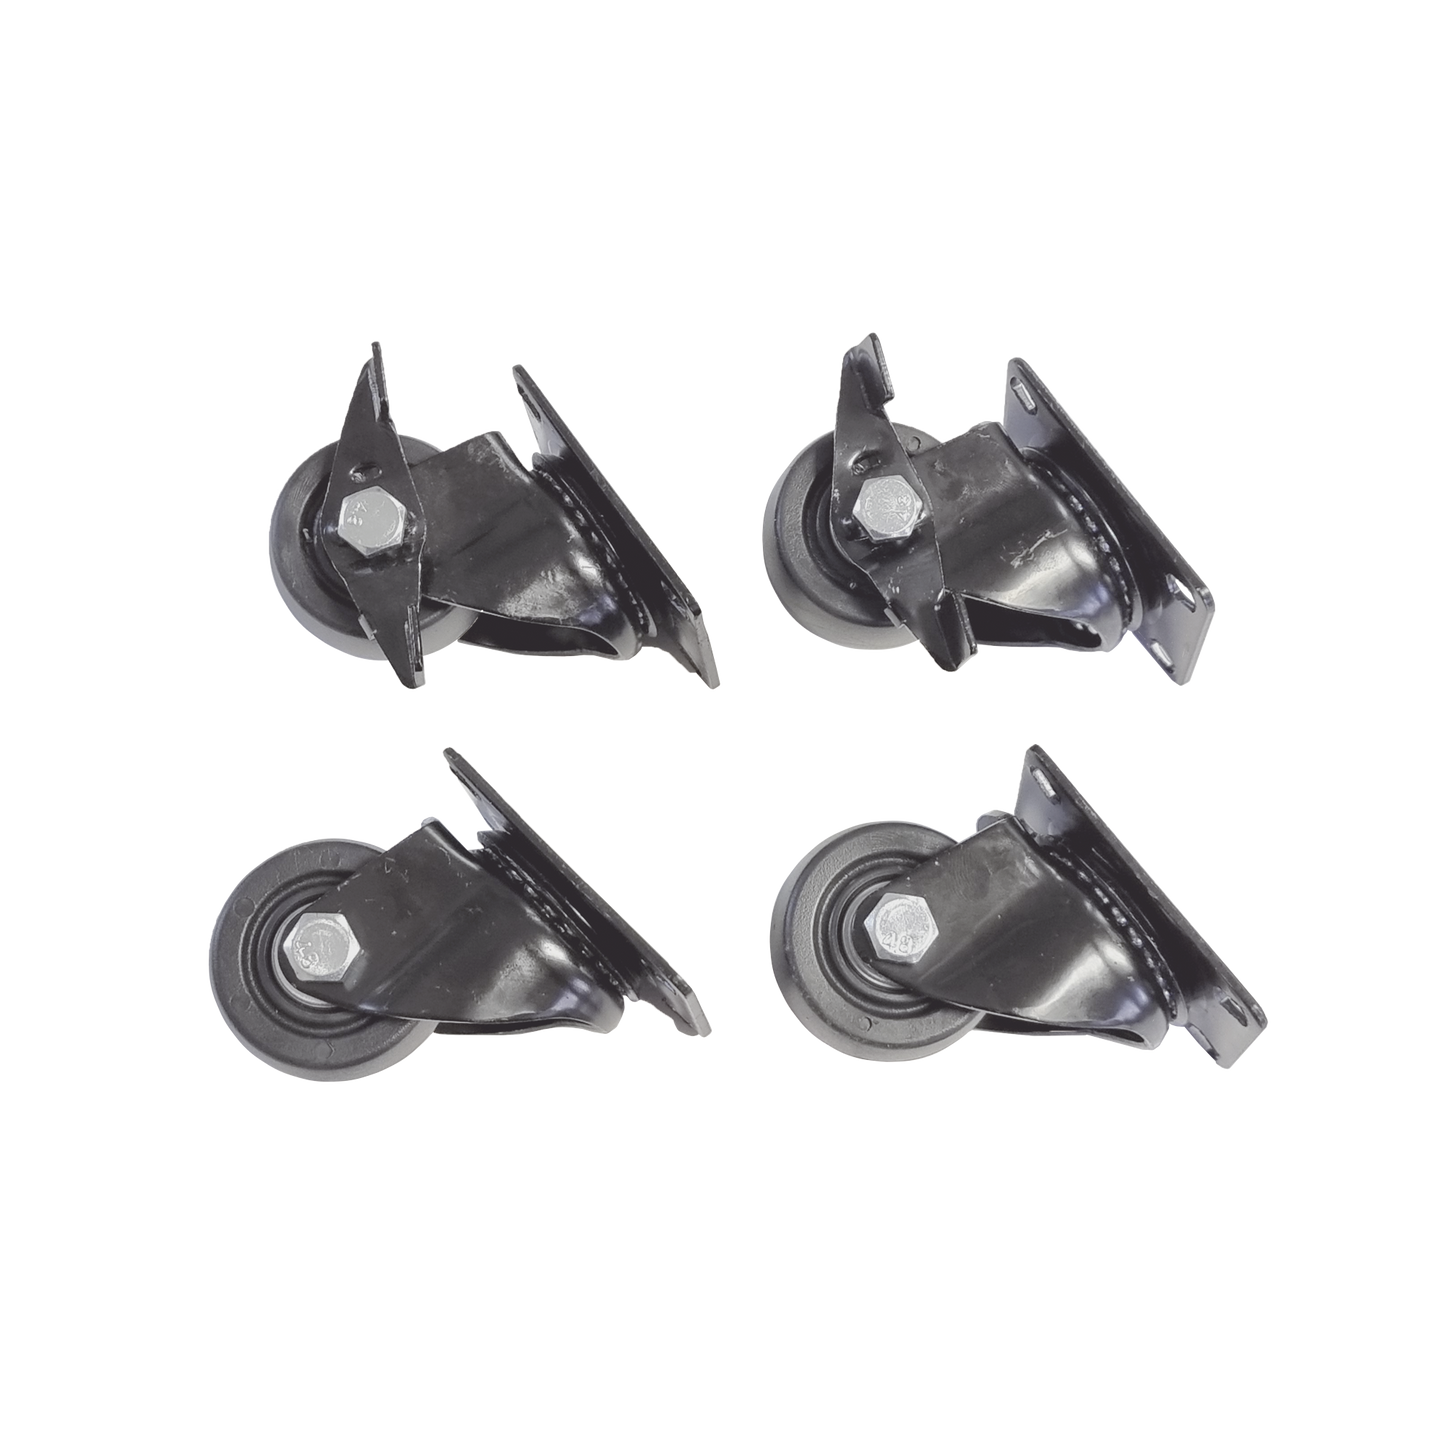 Heavy Duty Casters for Server Racks/Cabinets - Set of 4 Wheels for Linkedpro Cabinets (2 with brakes).